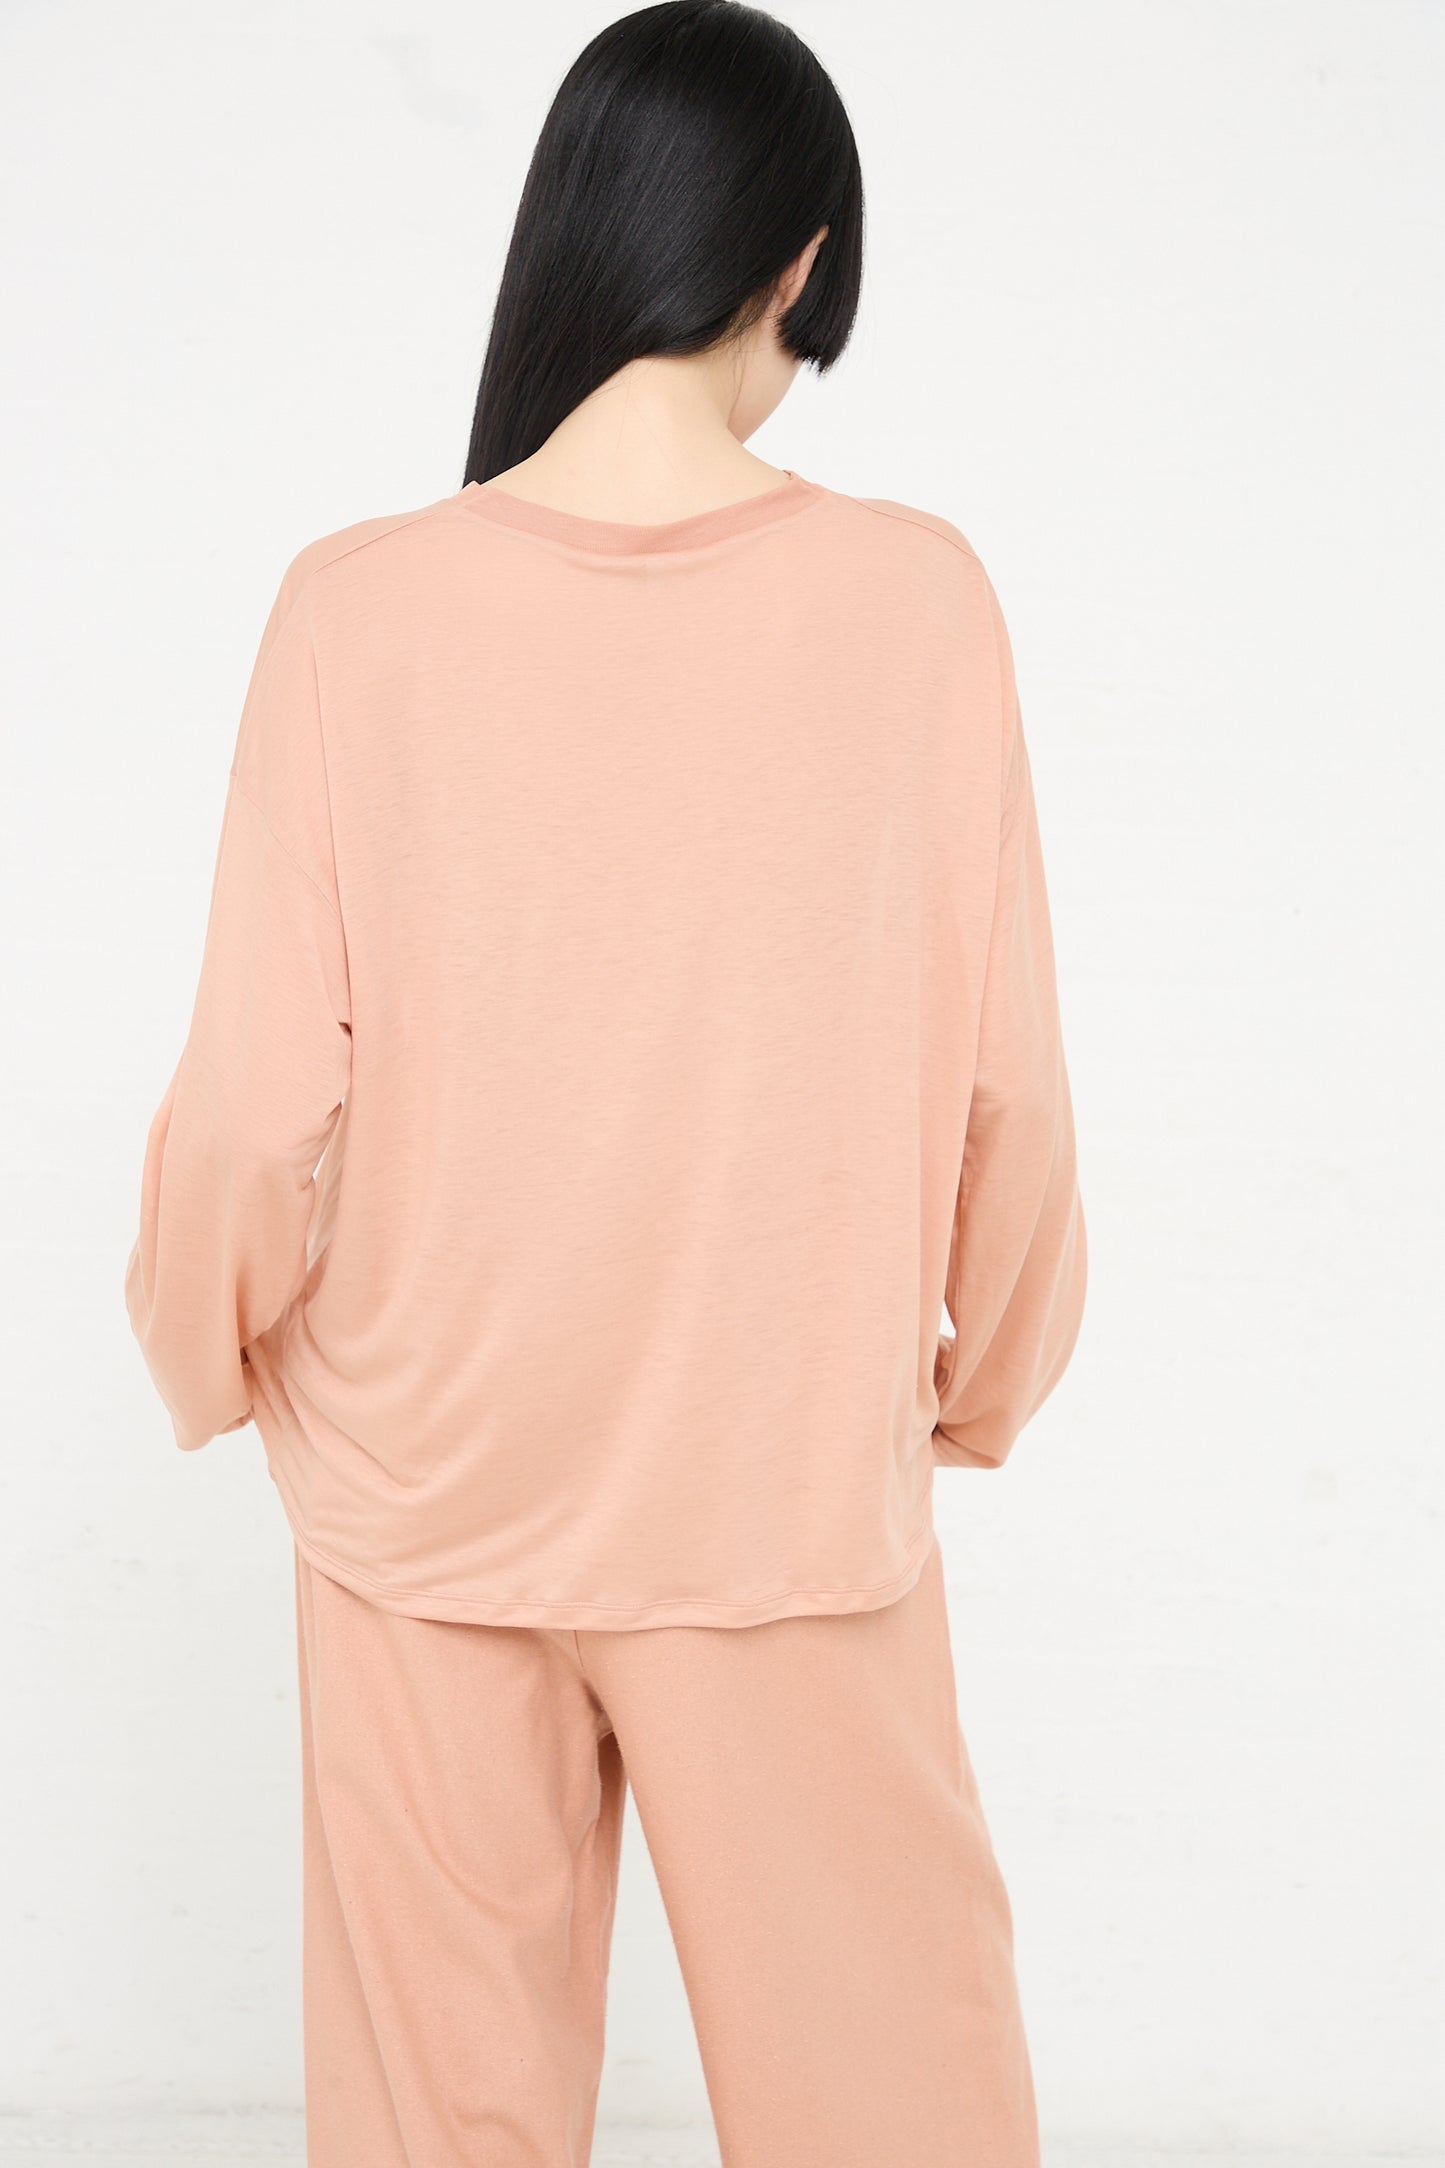 Woman wearing a Baserange Bamboo Loose Long Sleeve Tee in Yu Rose and matching pants, viewed from behind.